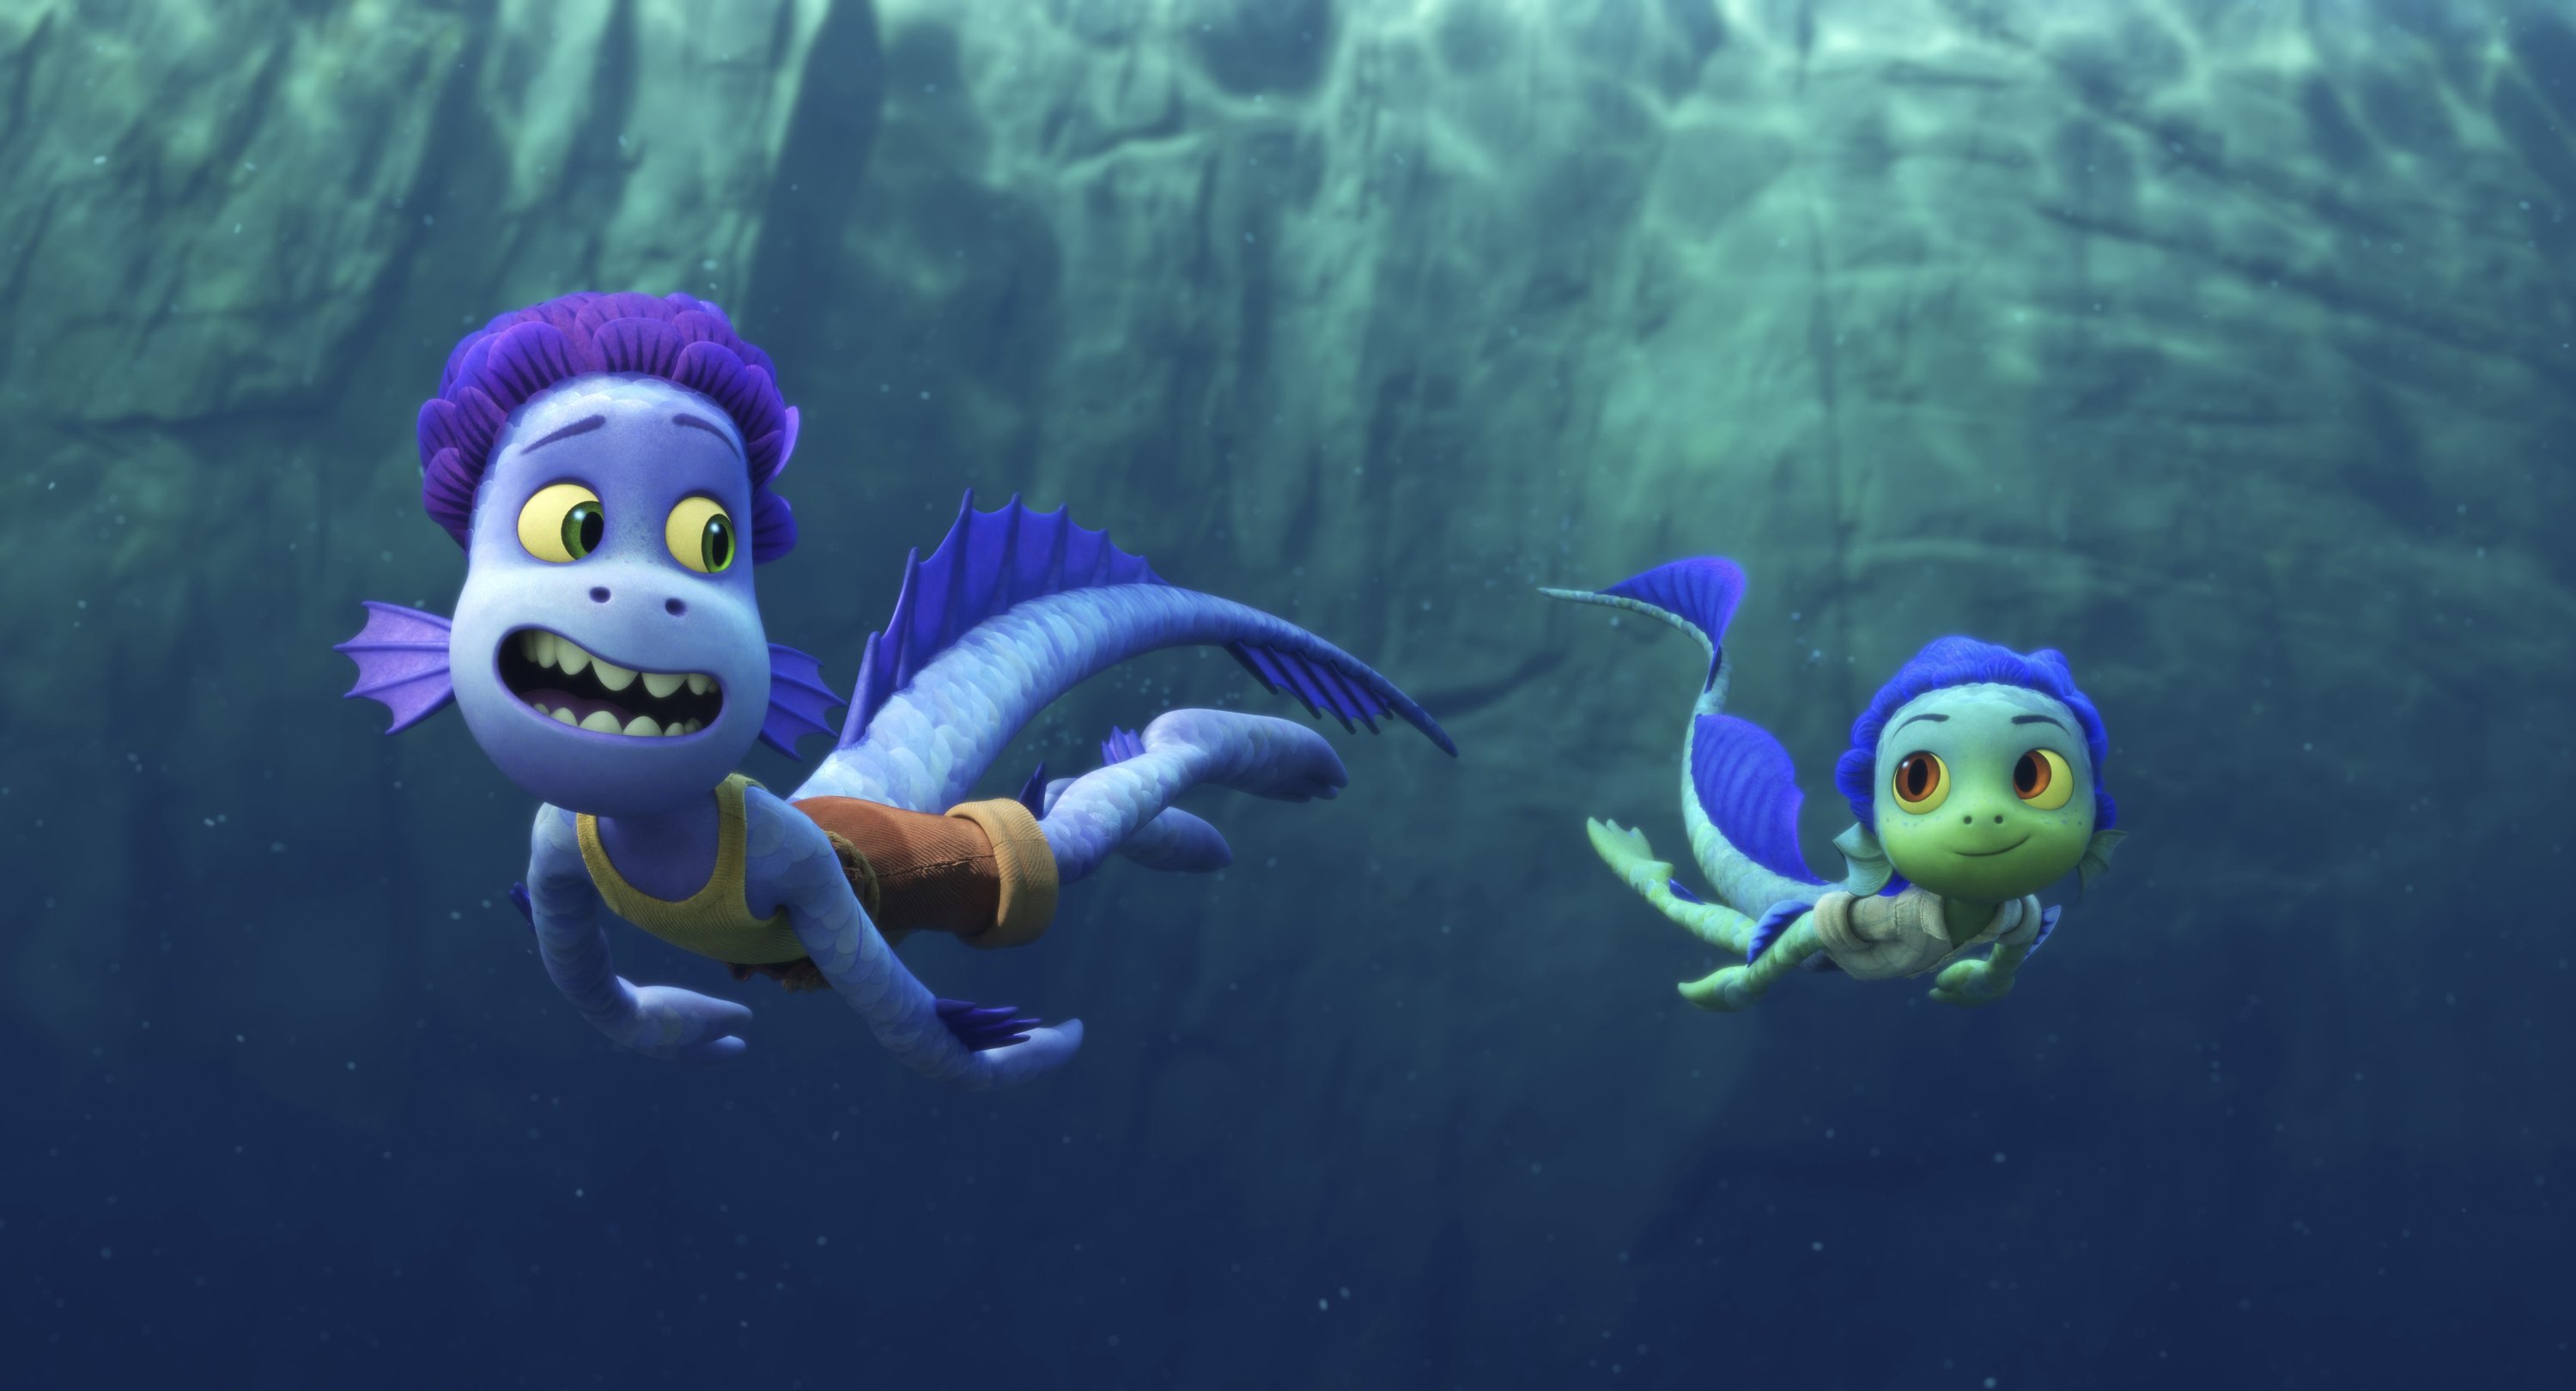 Alberto (L), voiced by Jack Dylan Grazer, and Luca, voiced by Jacob Tremblay, swim together in a scene from the animated film "Luca." (Photo by Disney via AP)